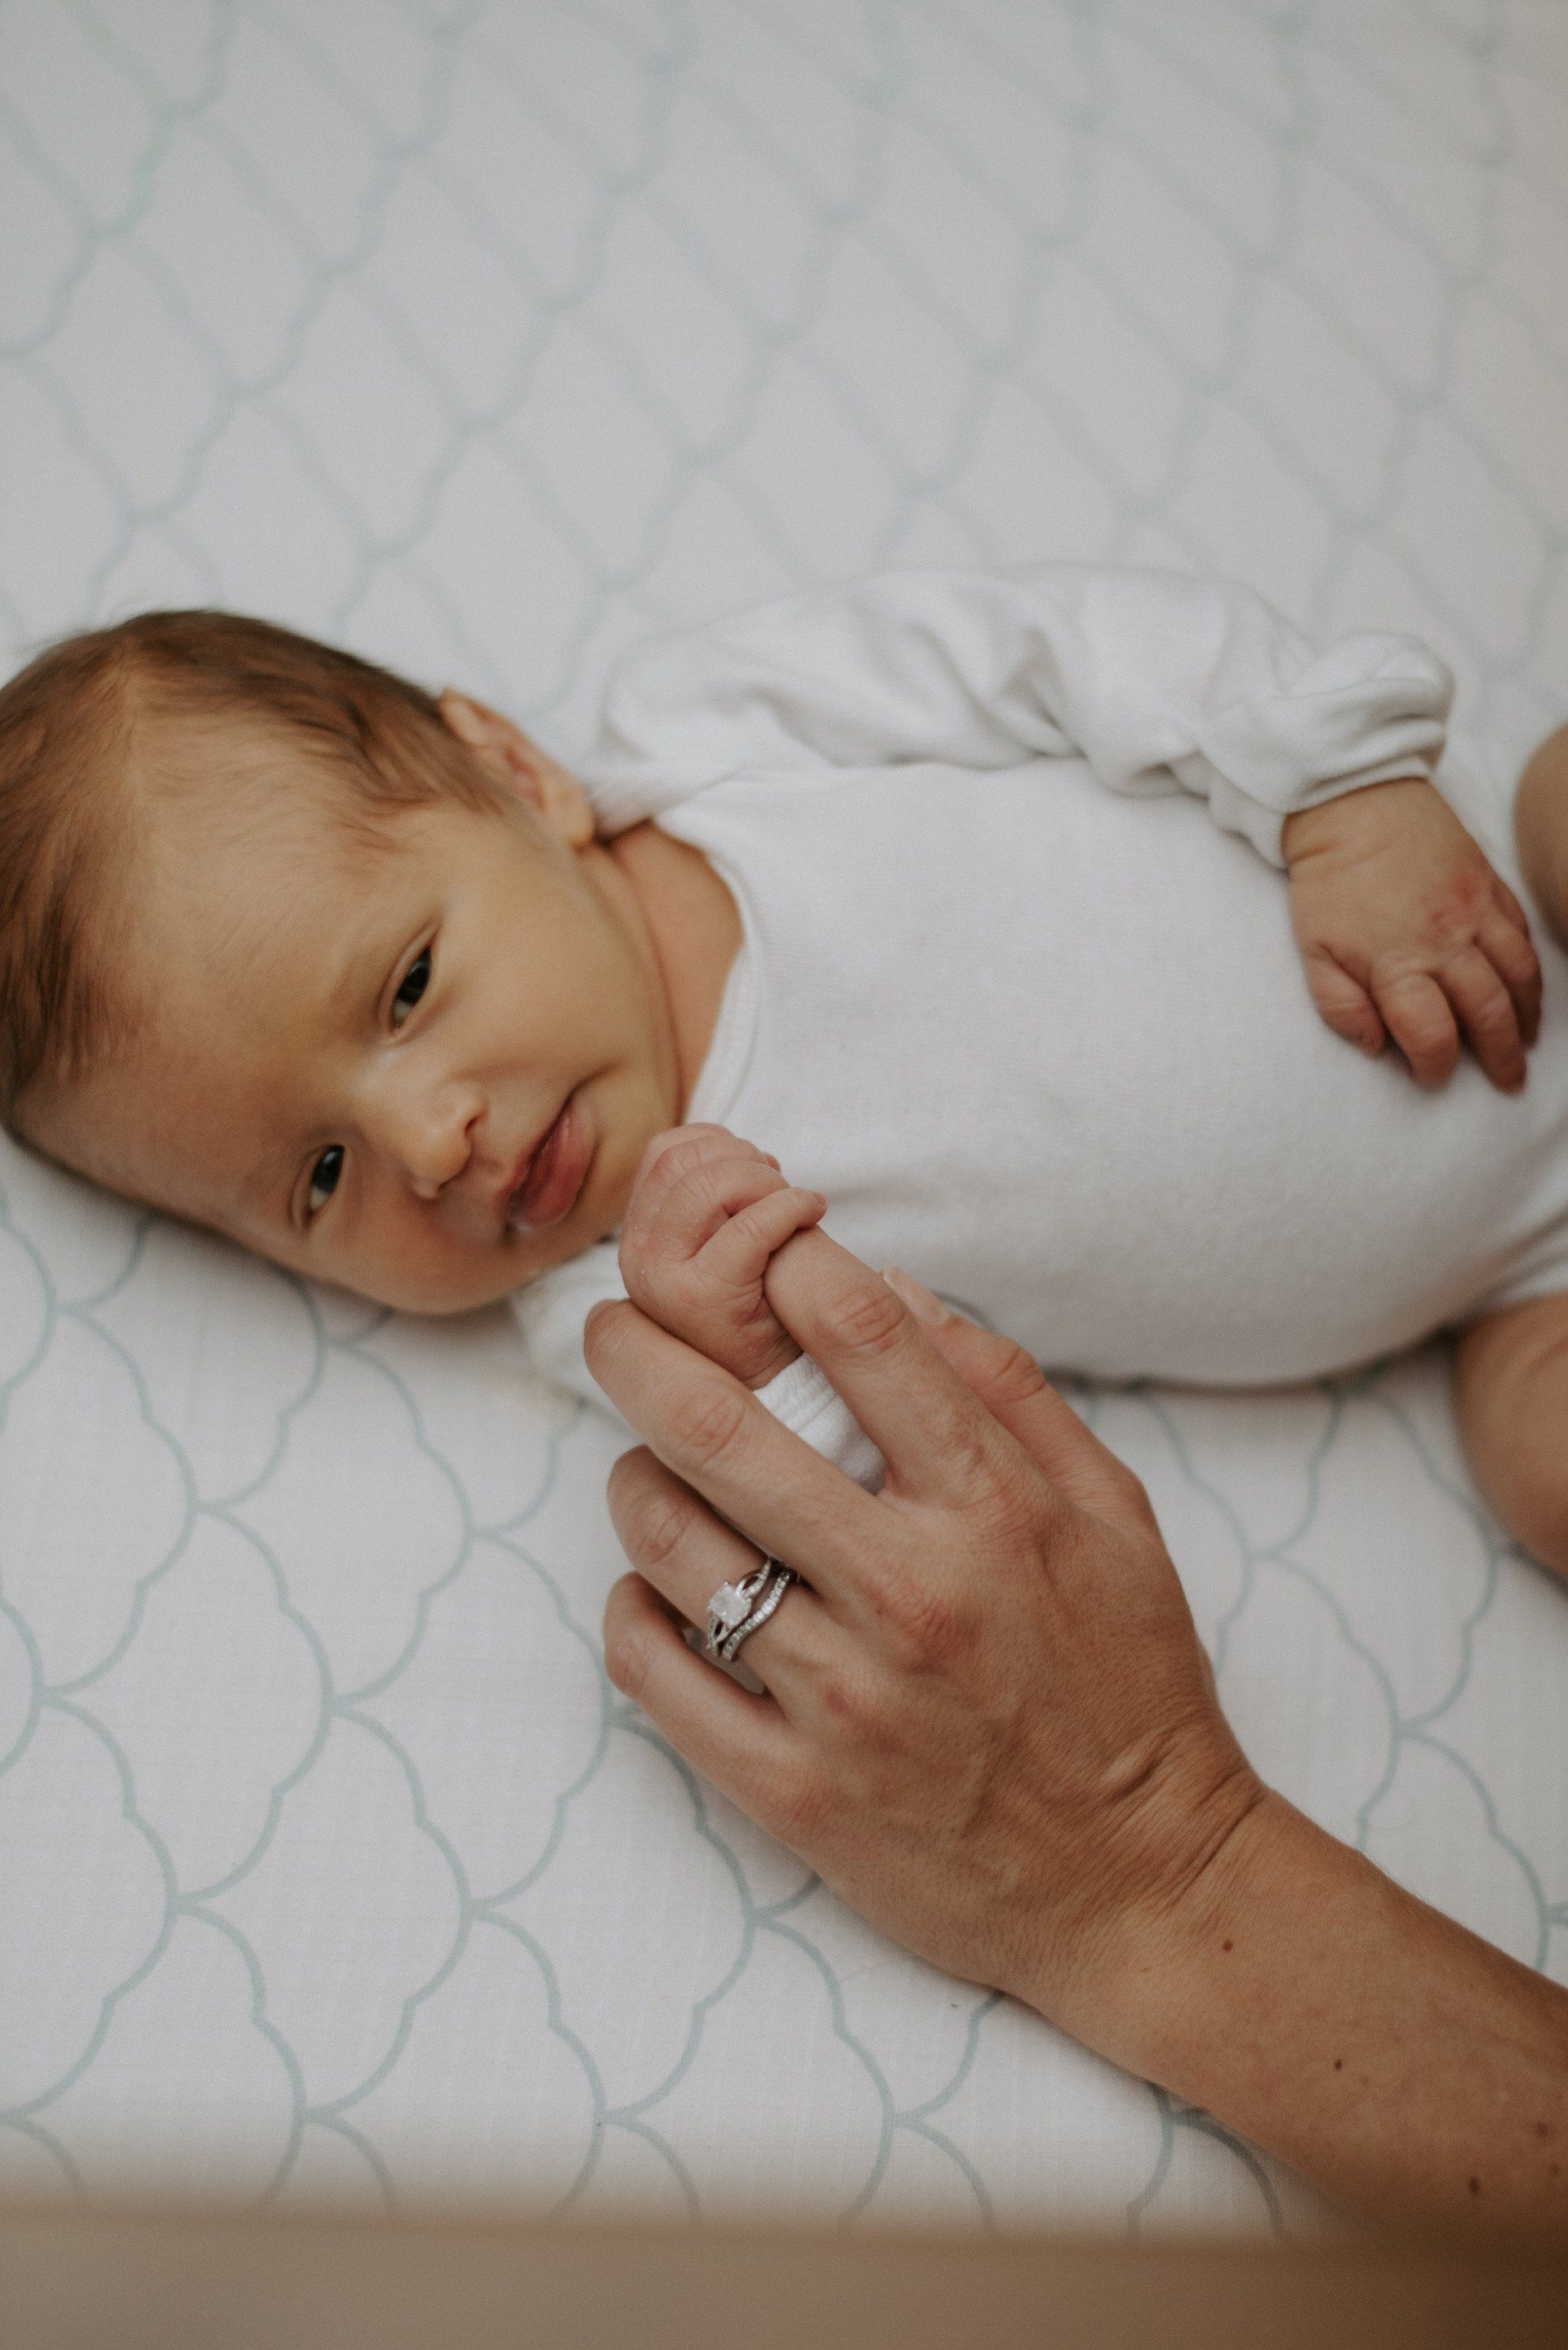 Caring For Your Newborn with Jaundice